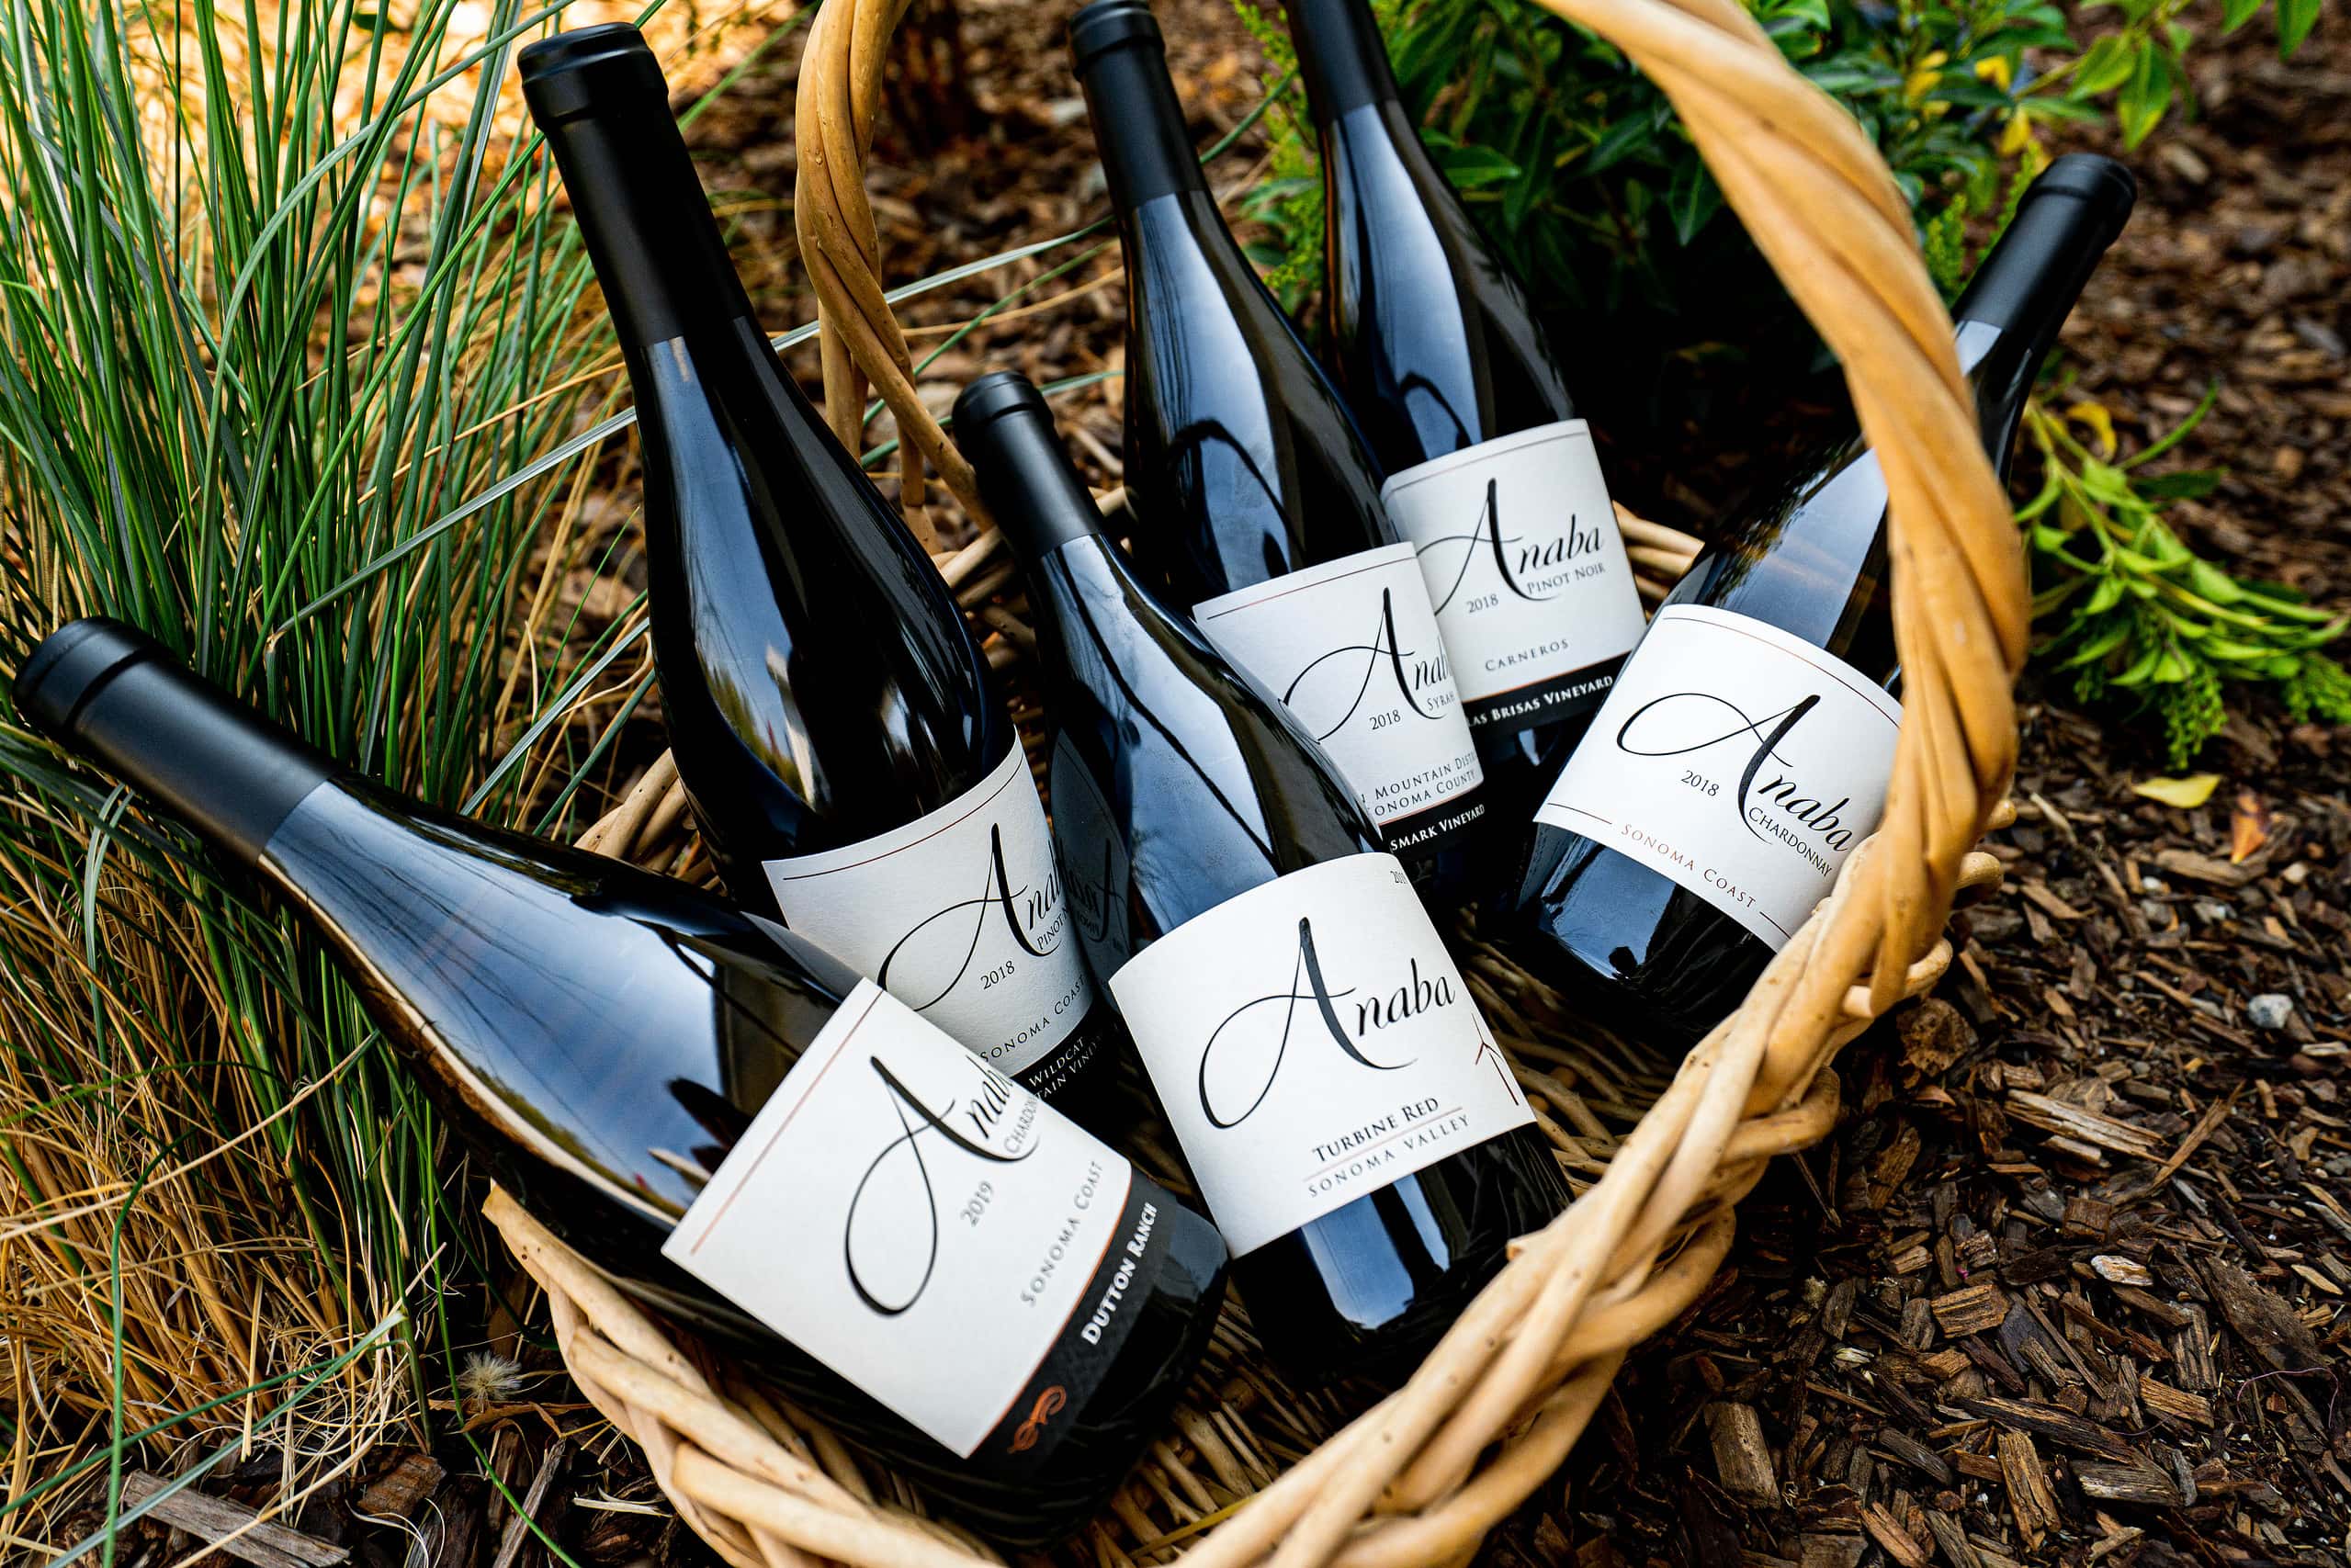 Six bottles of wine are placed in a wooden basket next to grass.